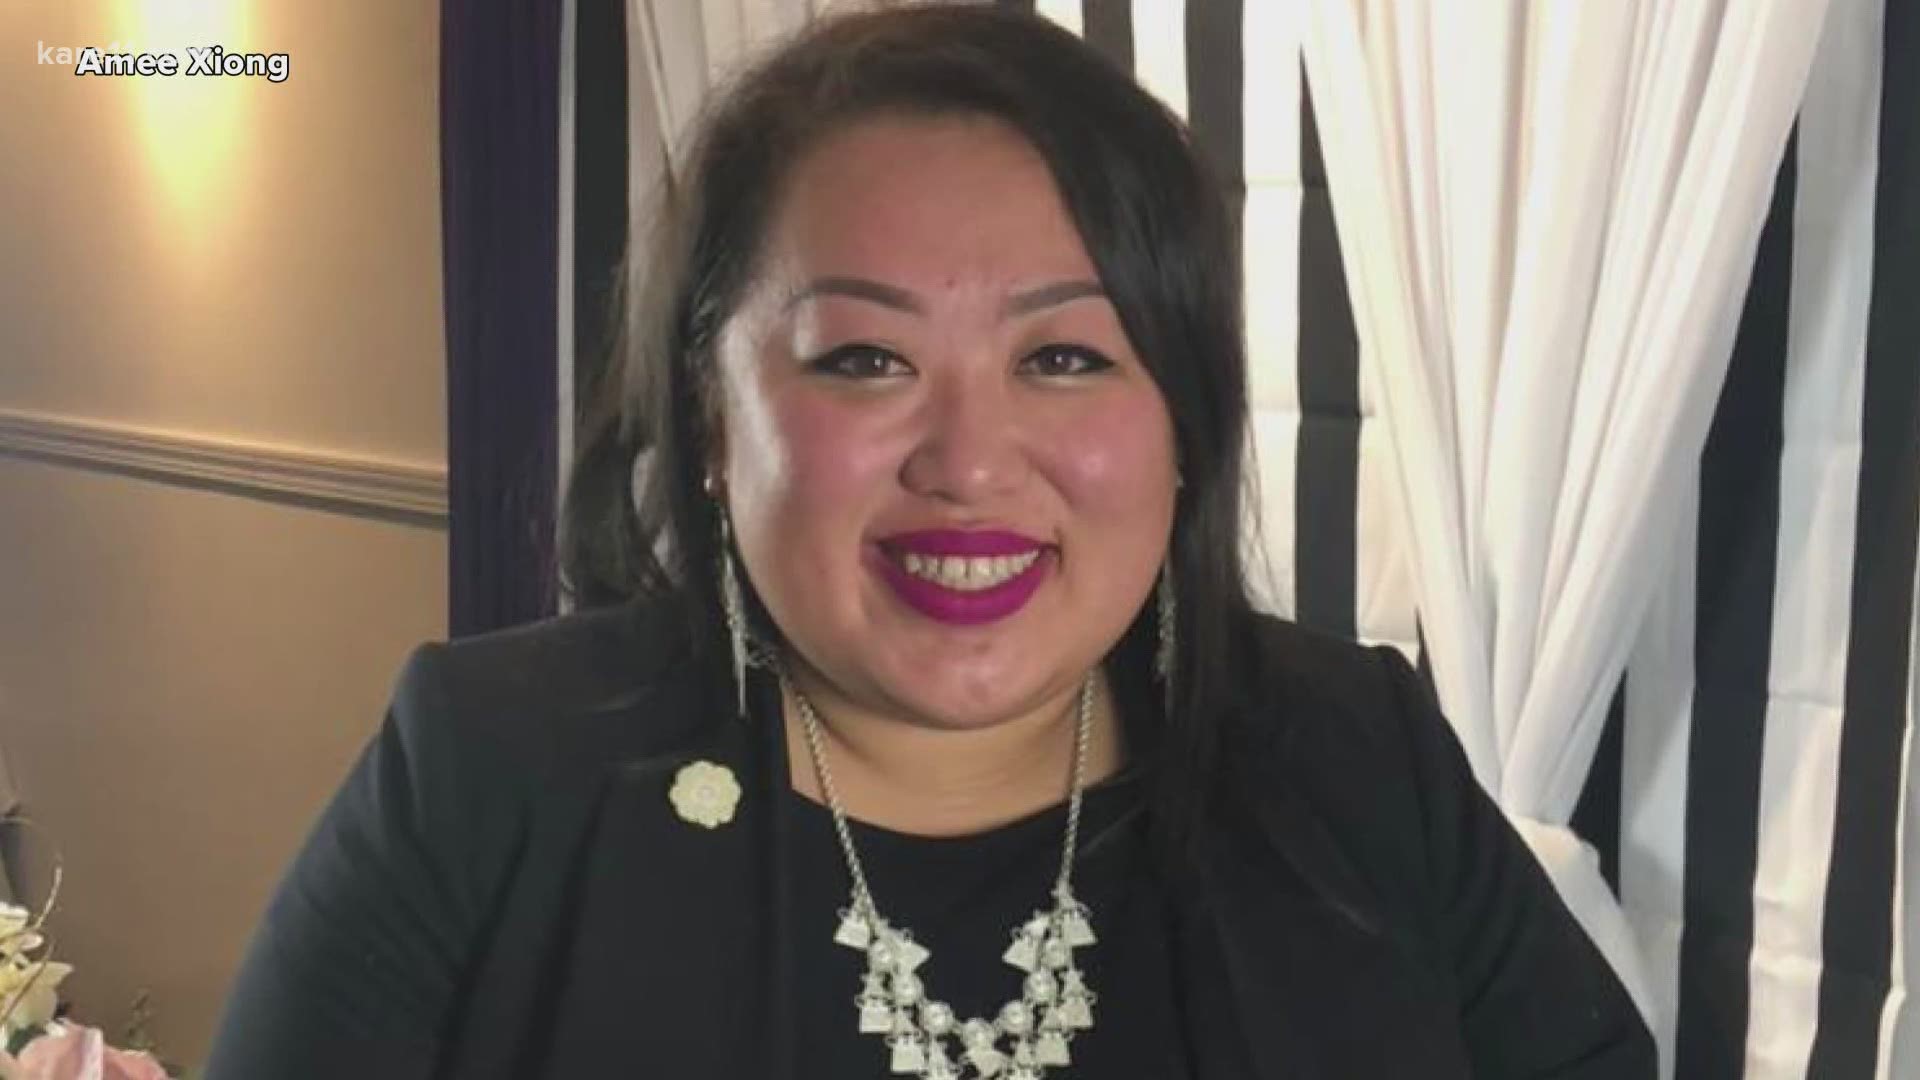 St. Paul Public Schools Board Chairwoman Marny Xiong died following a month-long battle with COVID-19.